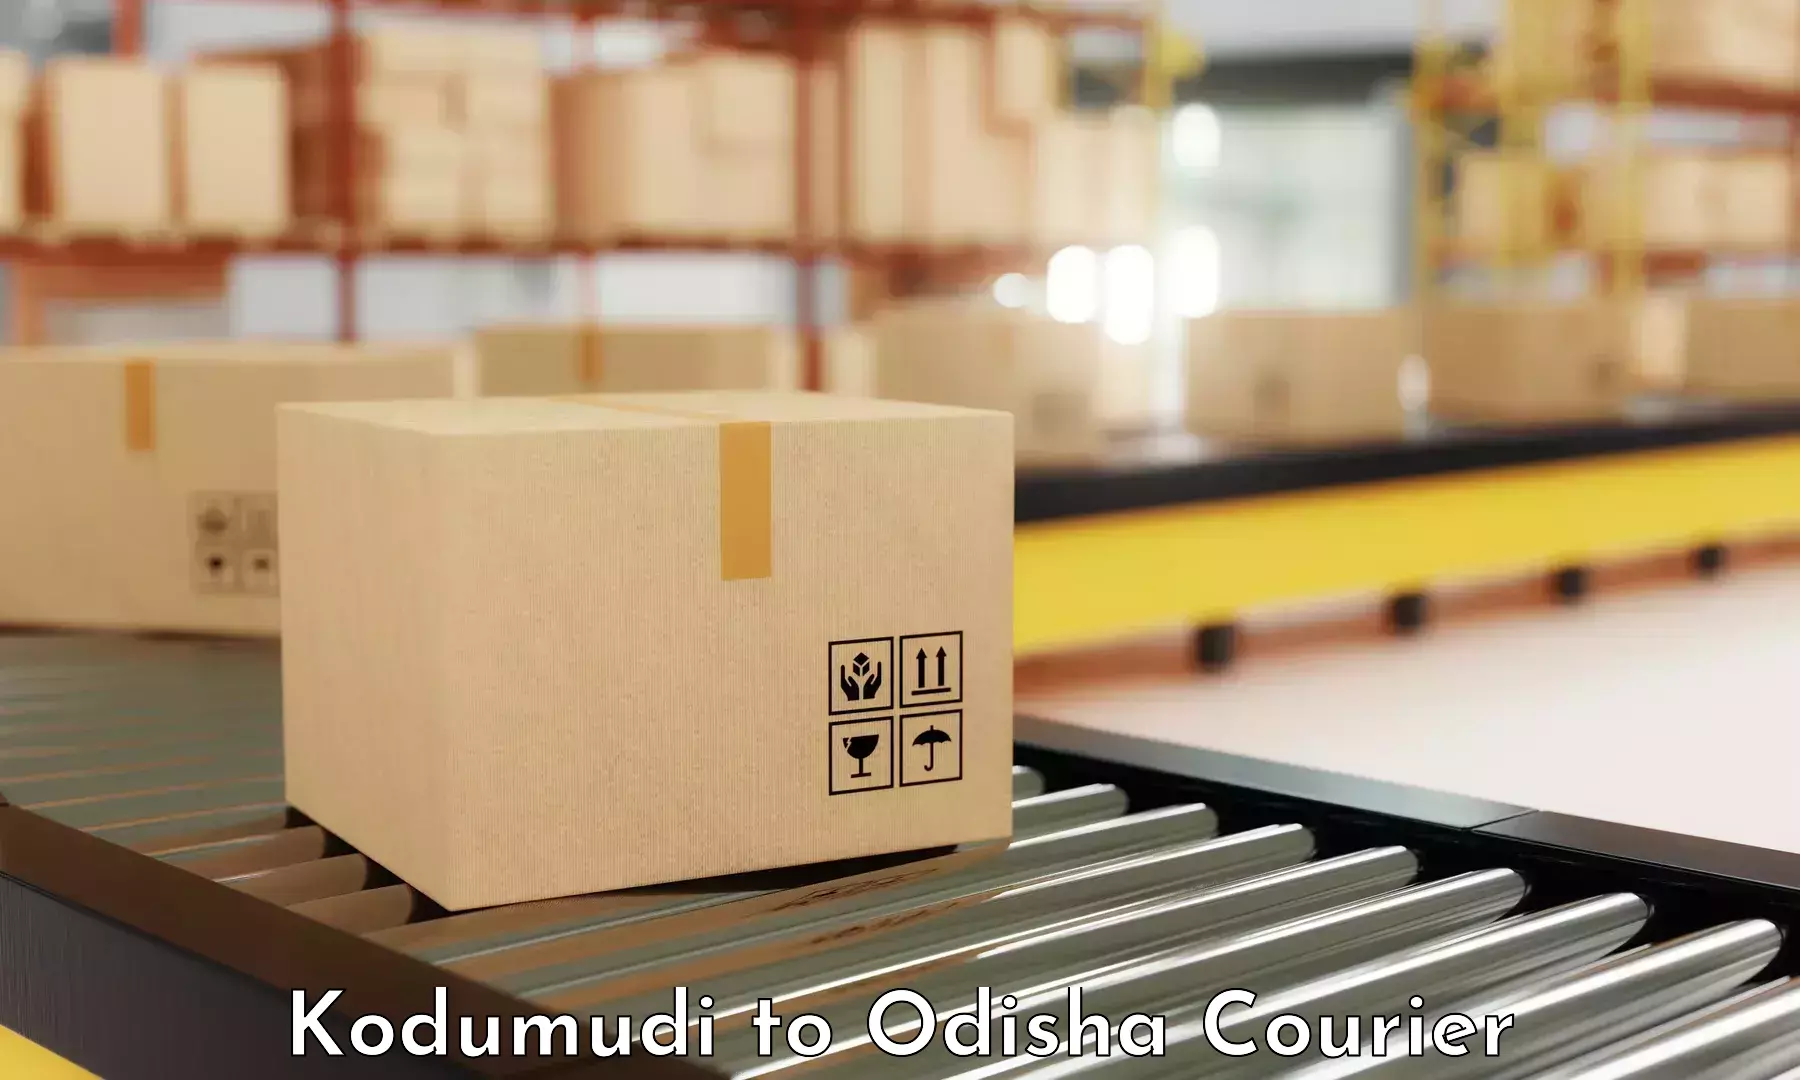 On-call courier service in Kodumudi to Dhamanagar